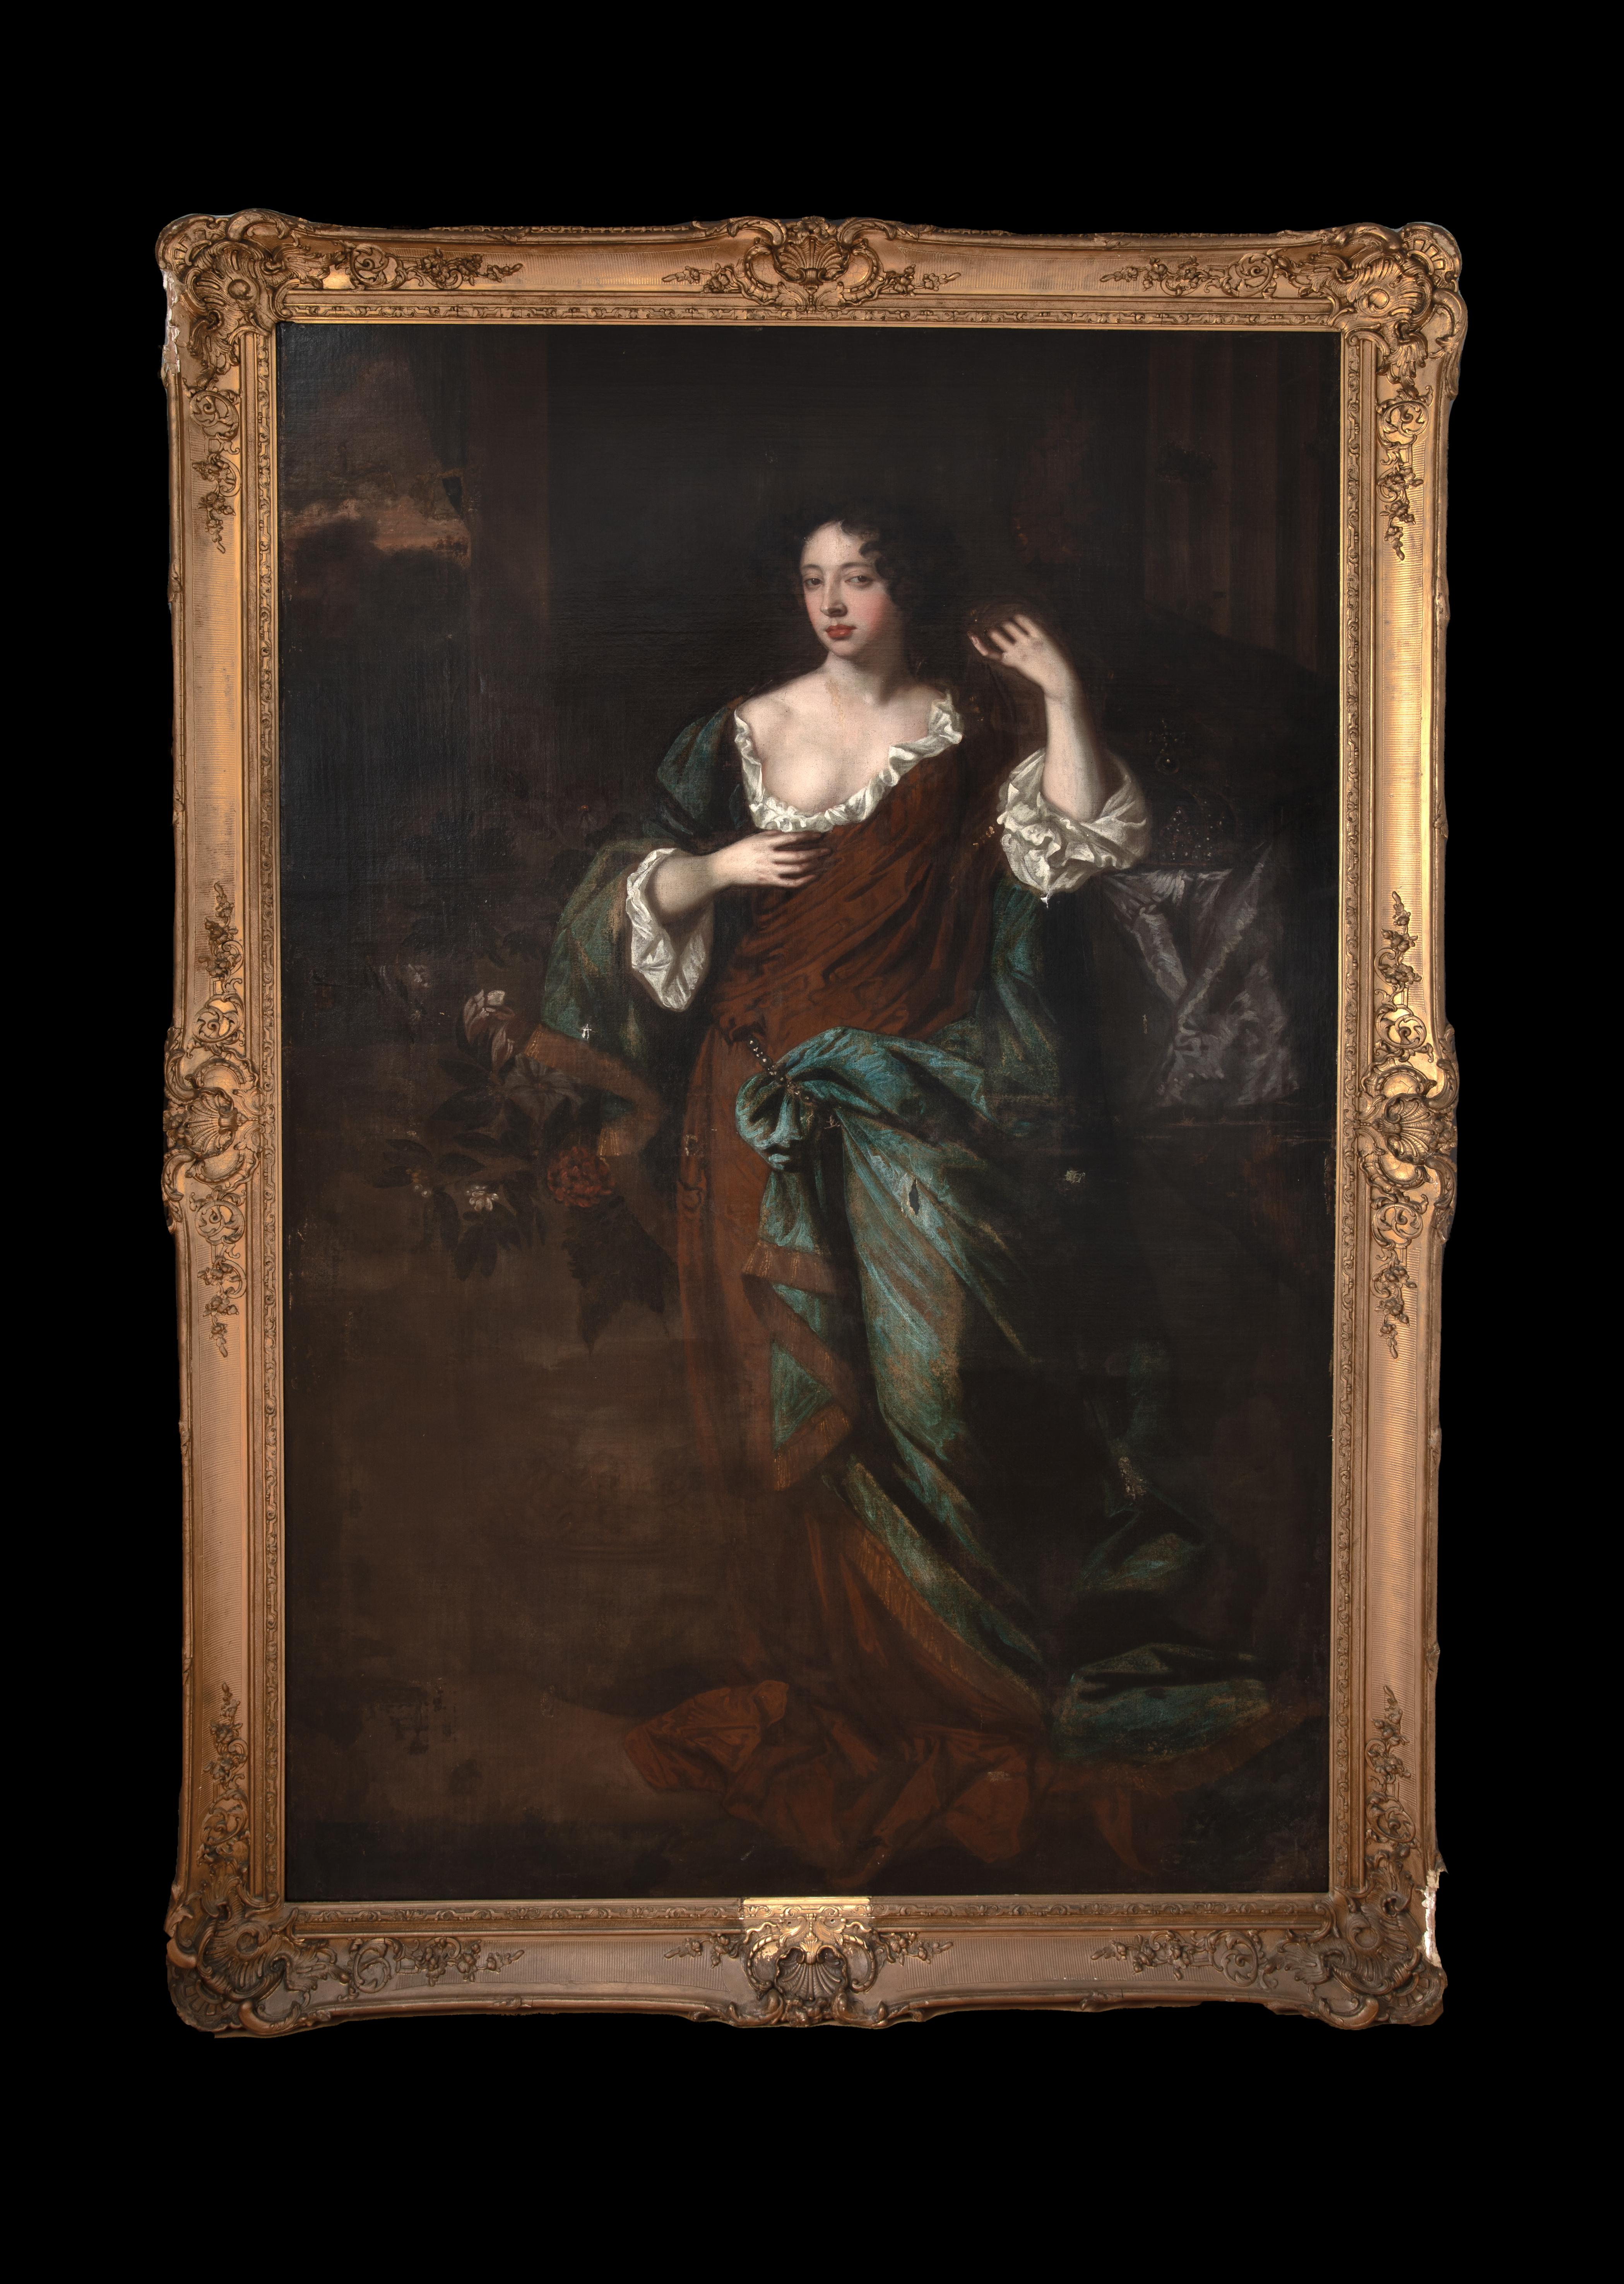 Portrait Of Mary Of Modena, Queen Of England, 17th Century  Studio Of SIR PETER  - Painting by Studio of Sir Peter Lely